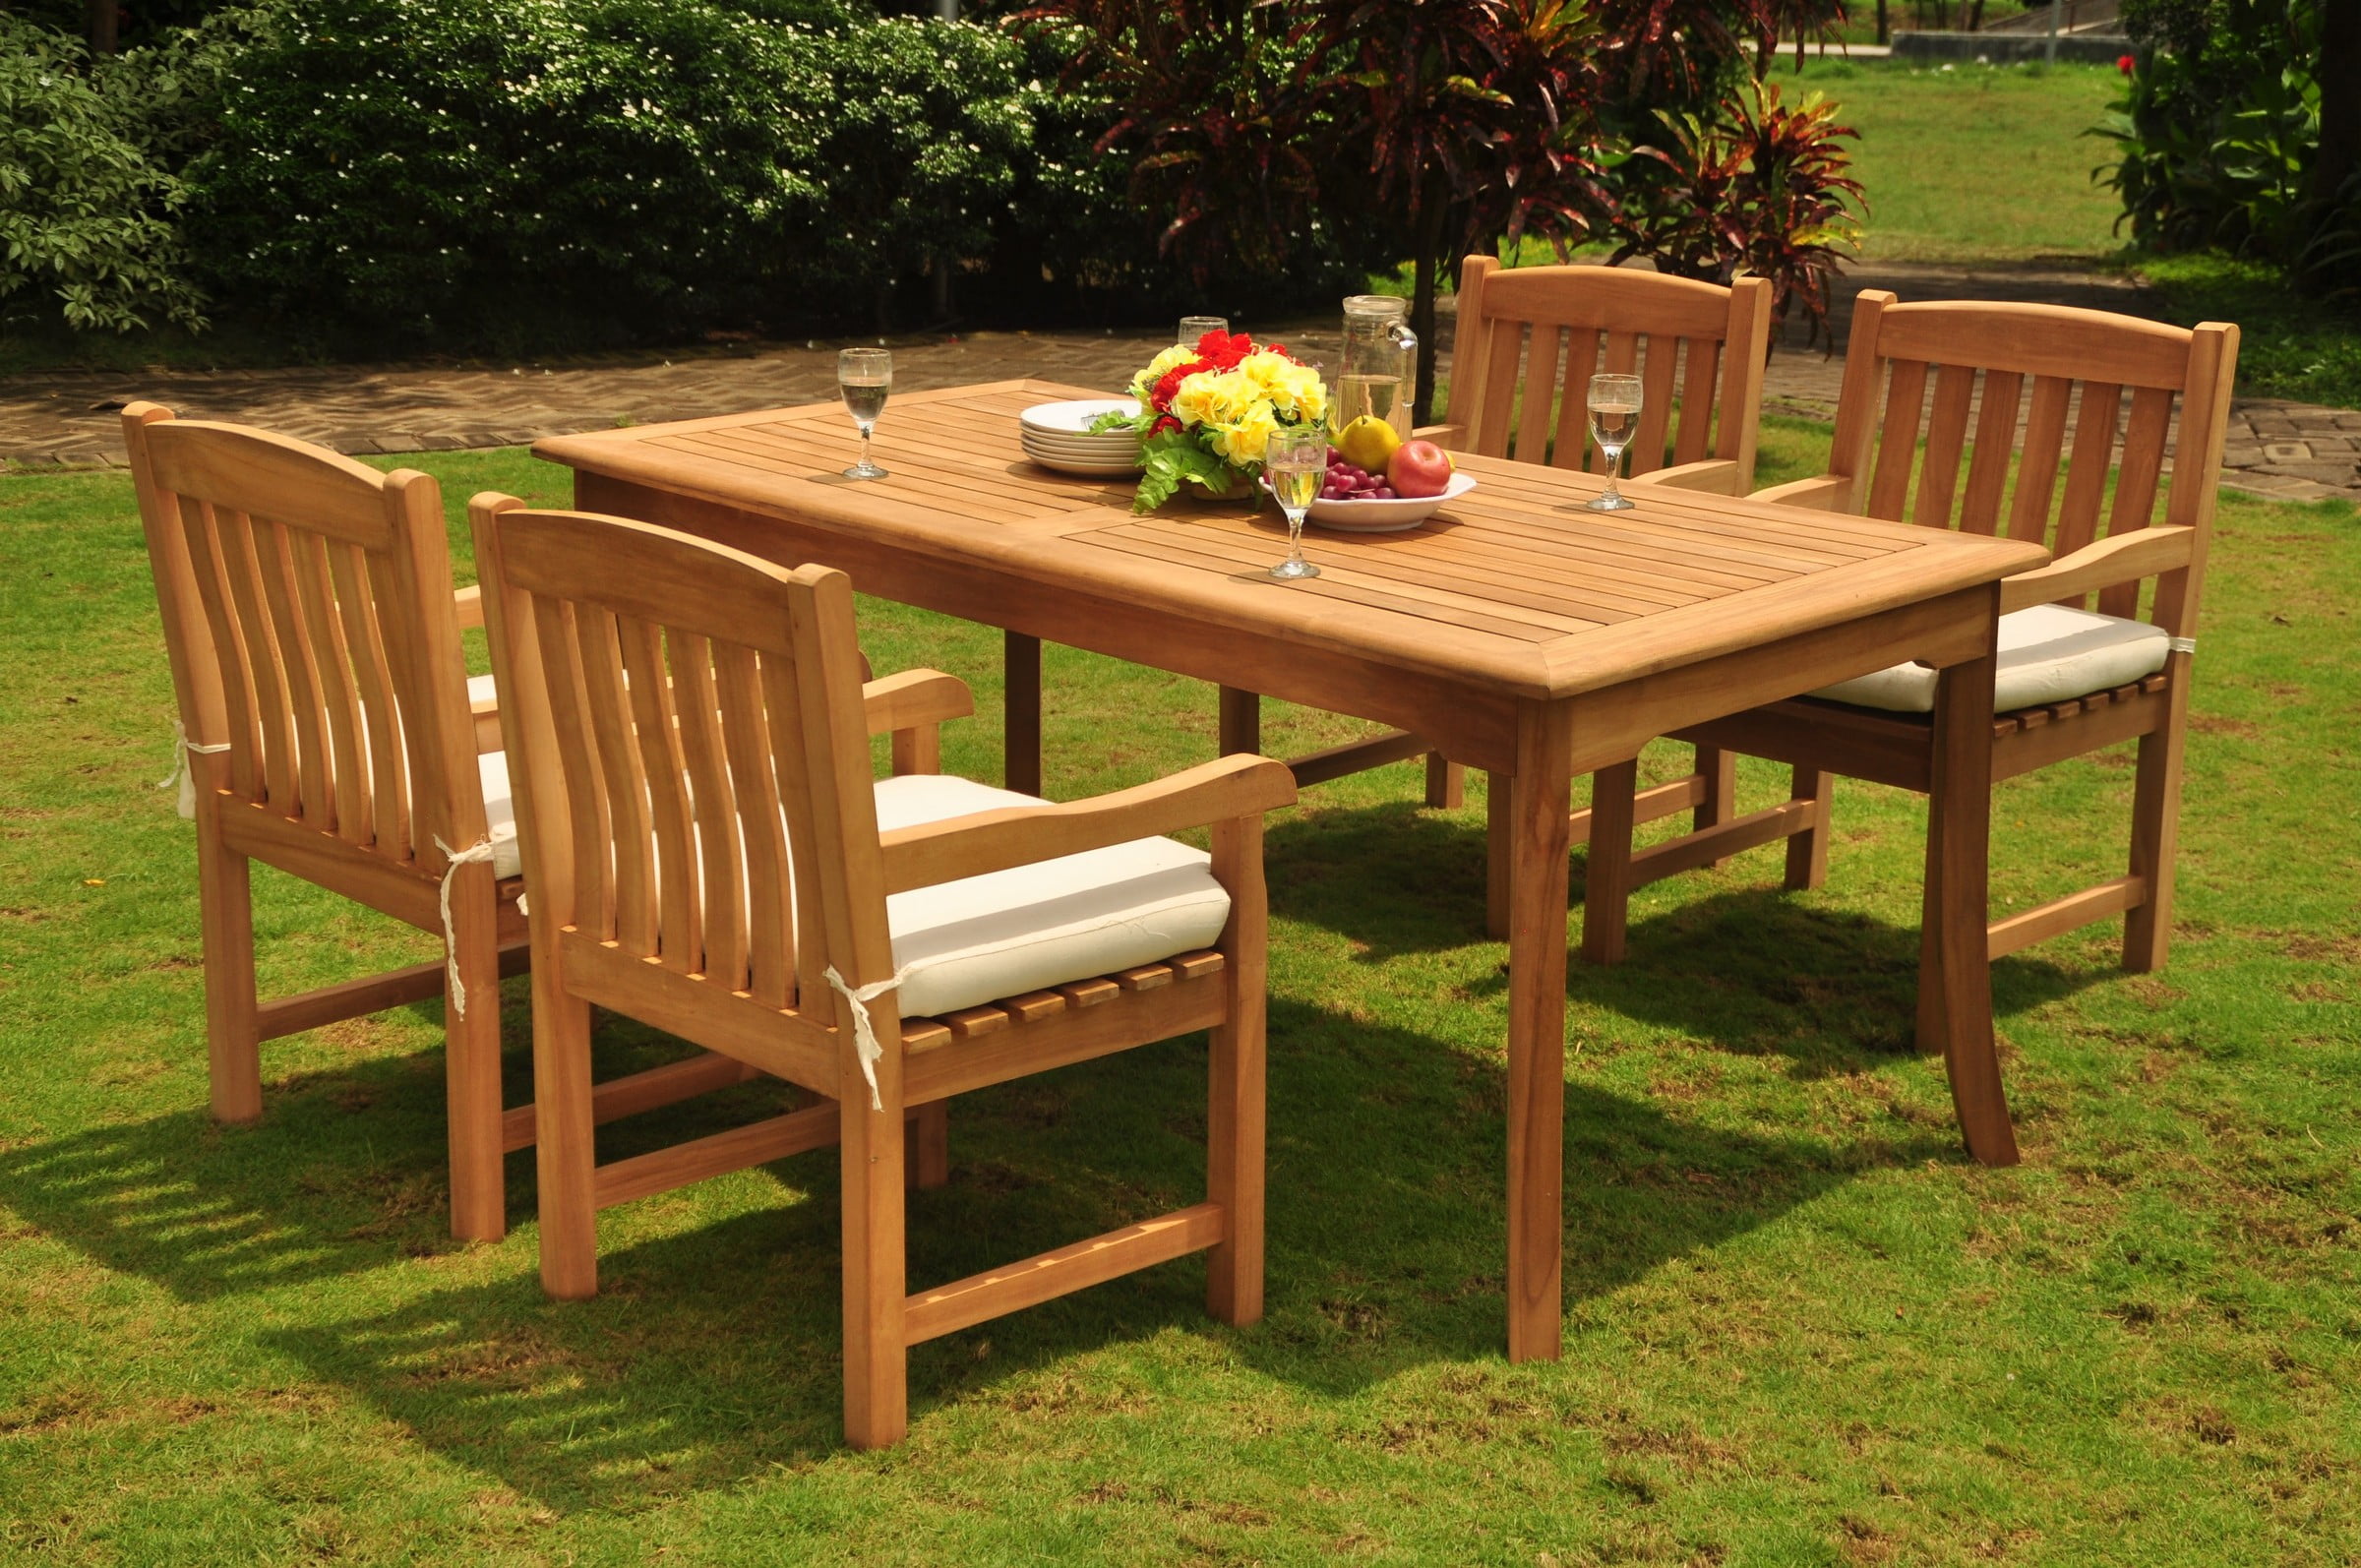 Teak Outdoor Furniture Sets For Every Garden Style